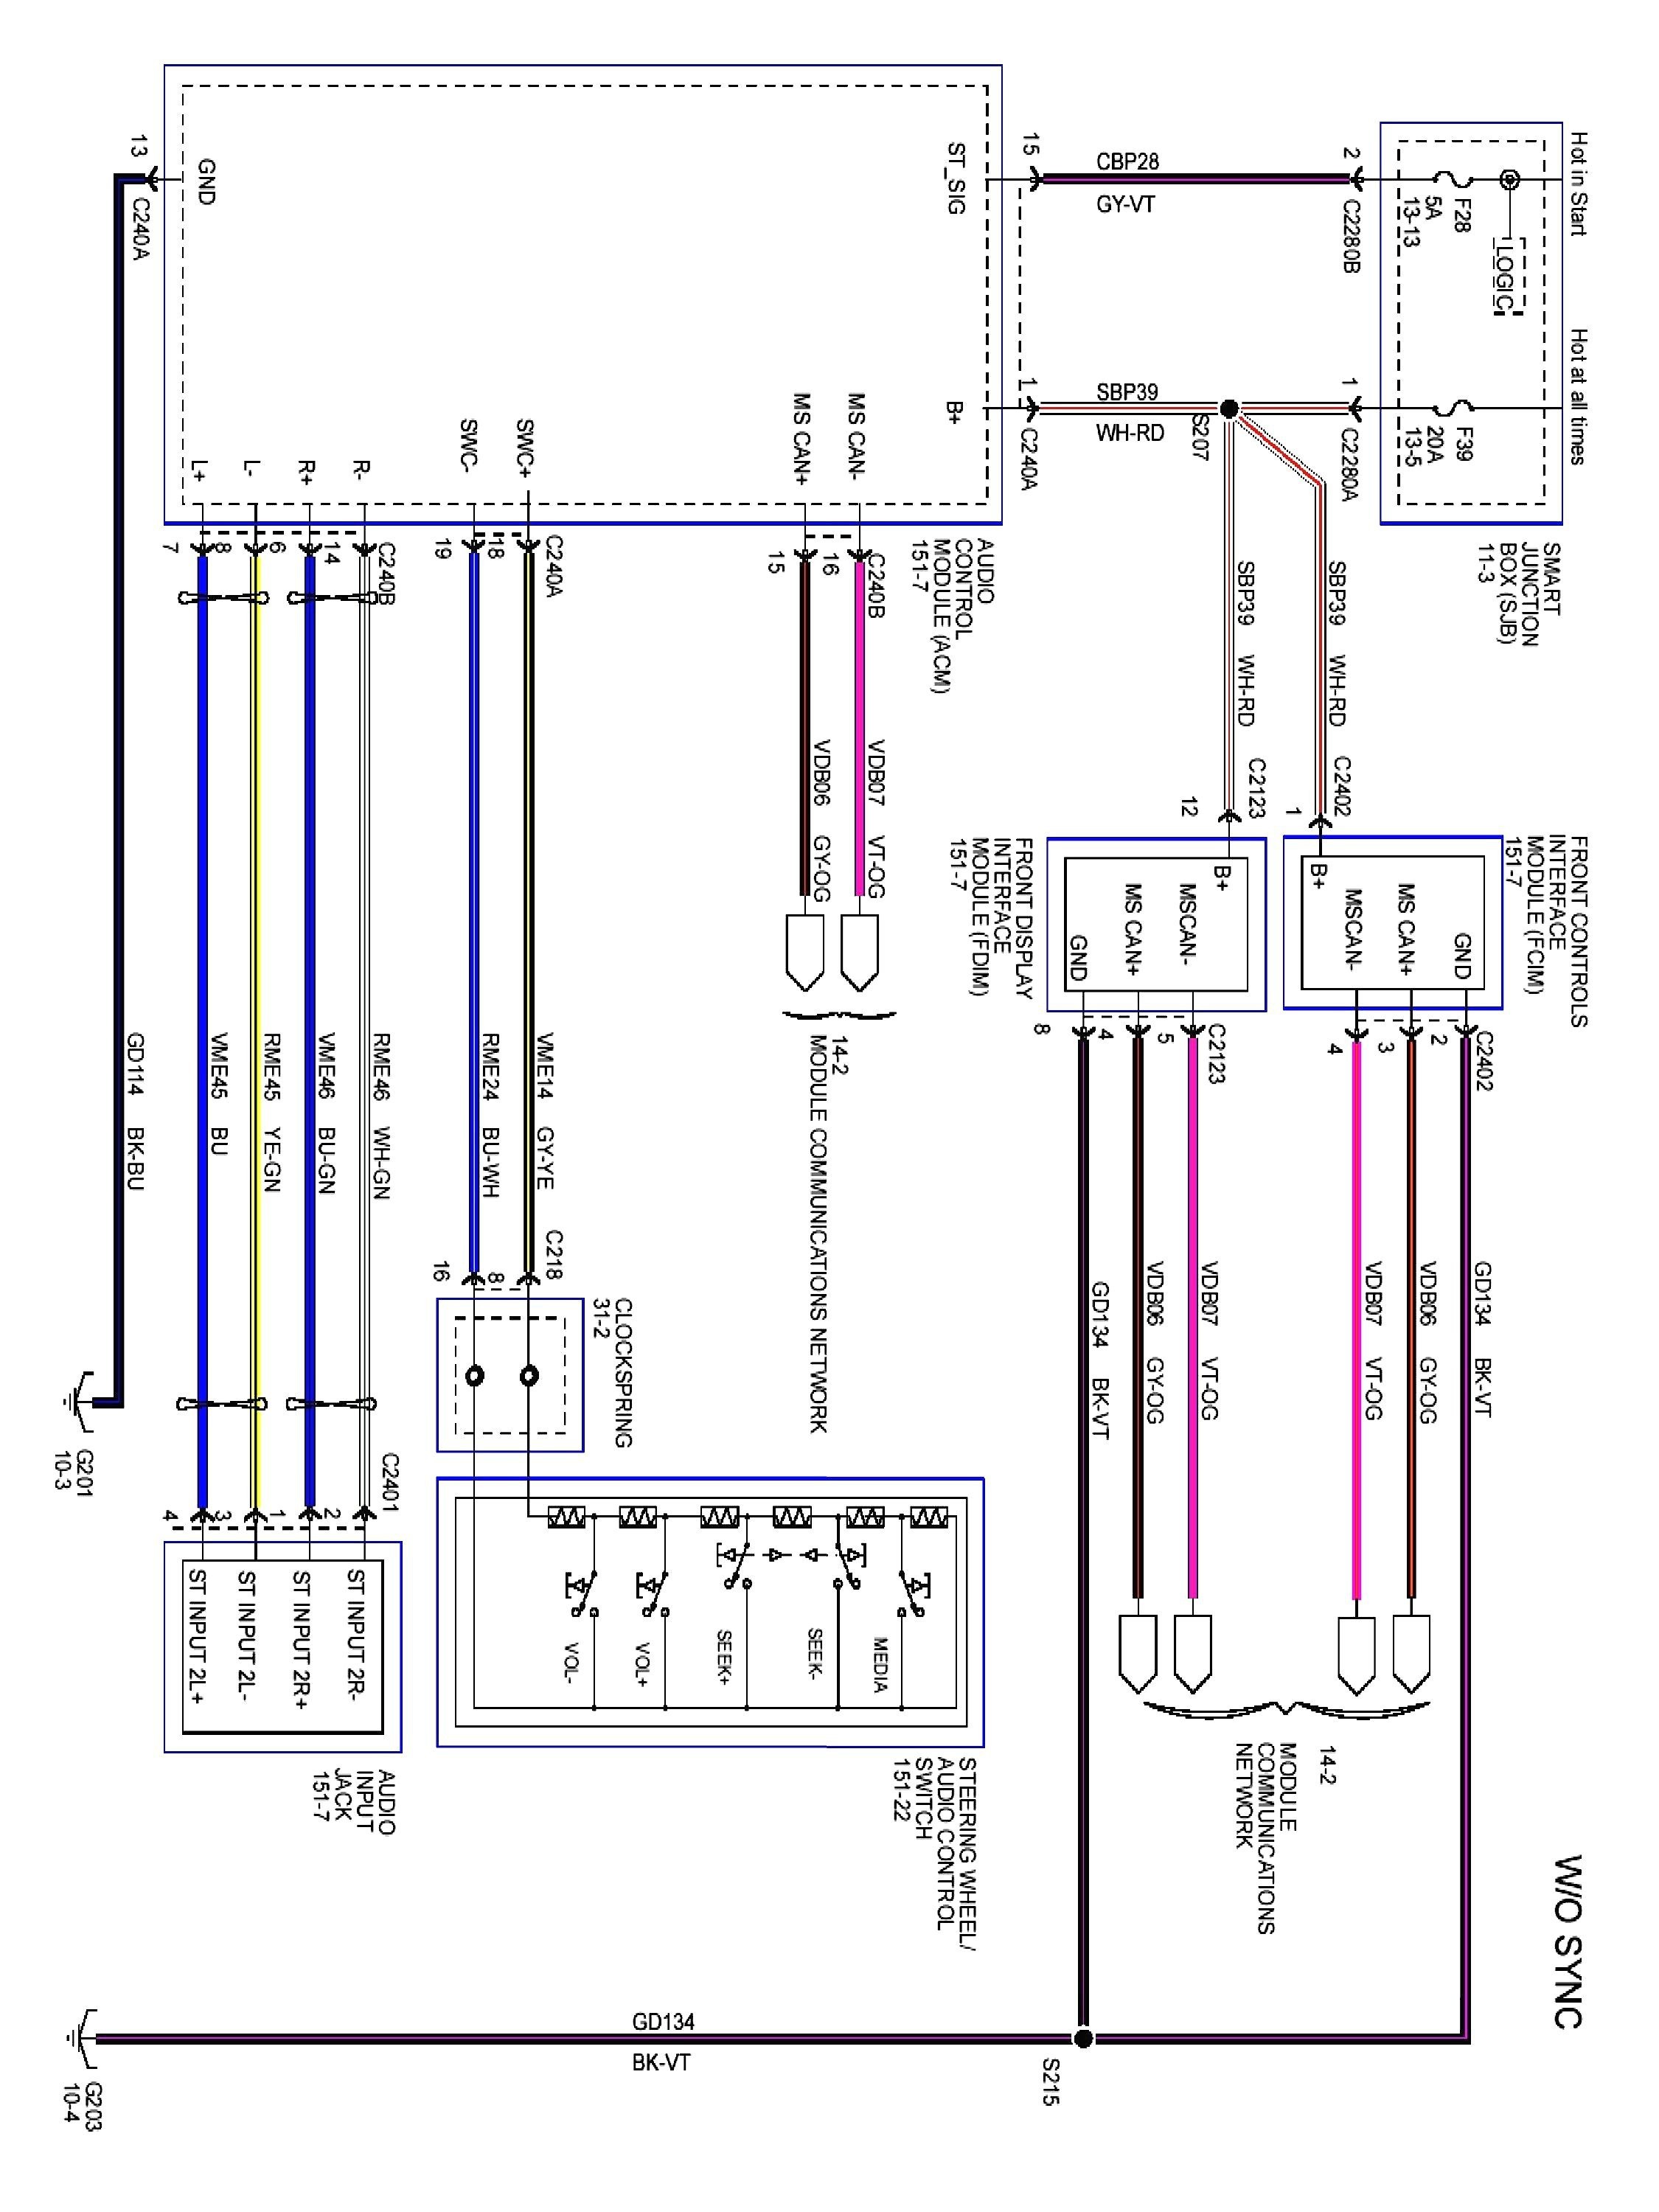 Gallery of Luxury Home Wiring Diagrams